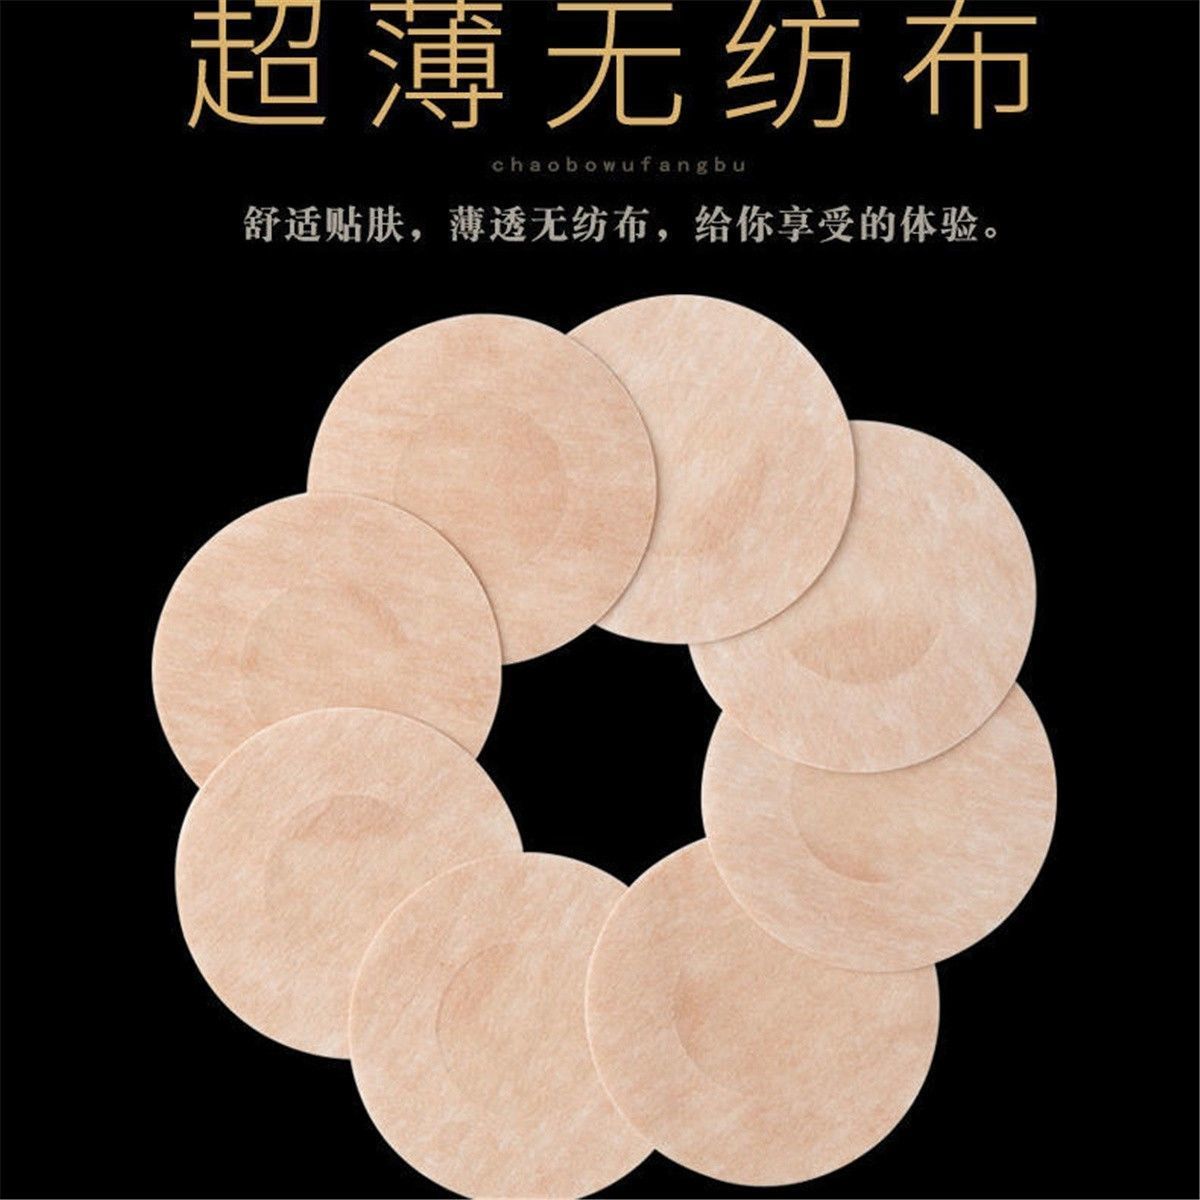 Disposable nipple stickers anti-convex large breasts small chest students military training anti-light chest stickers nipple stickers invisible breathable non-woven fabric